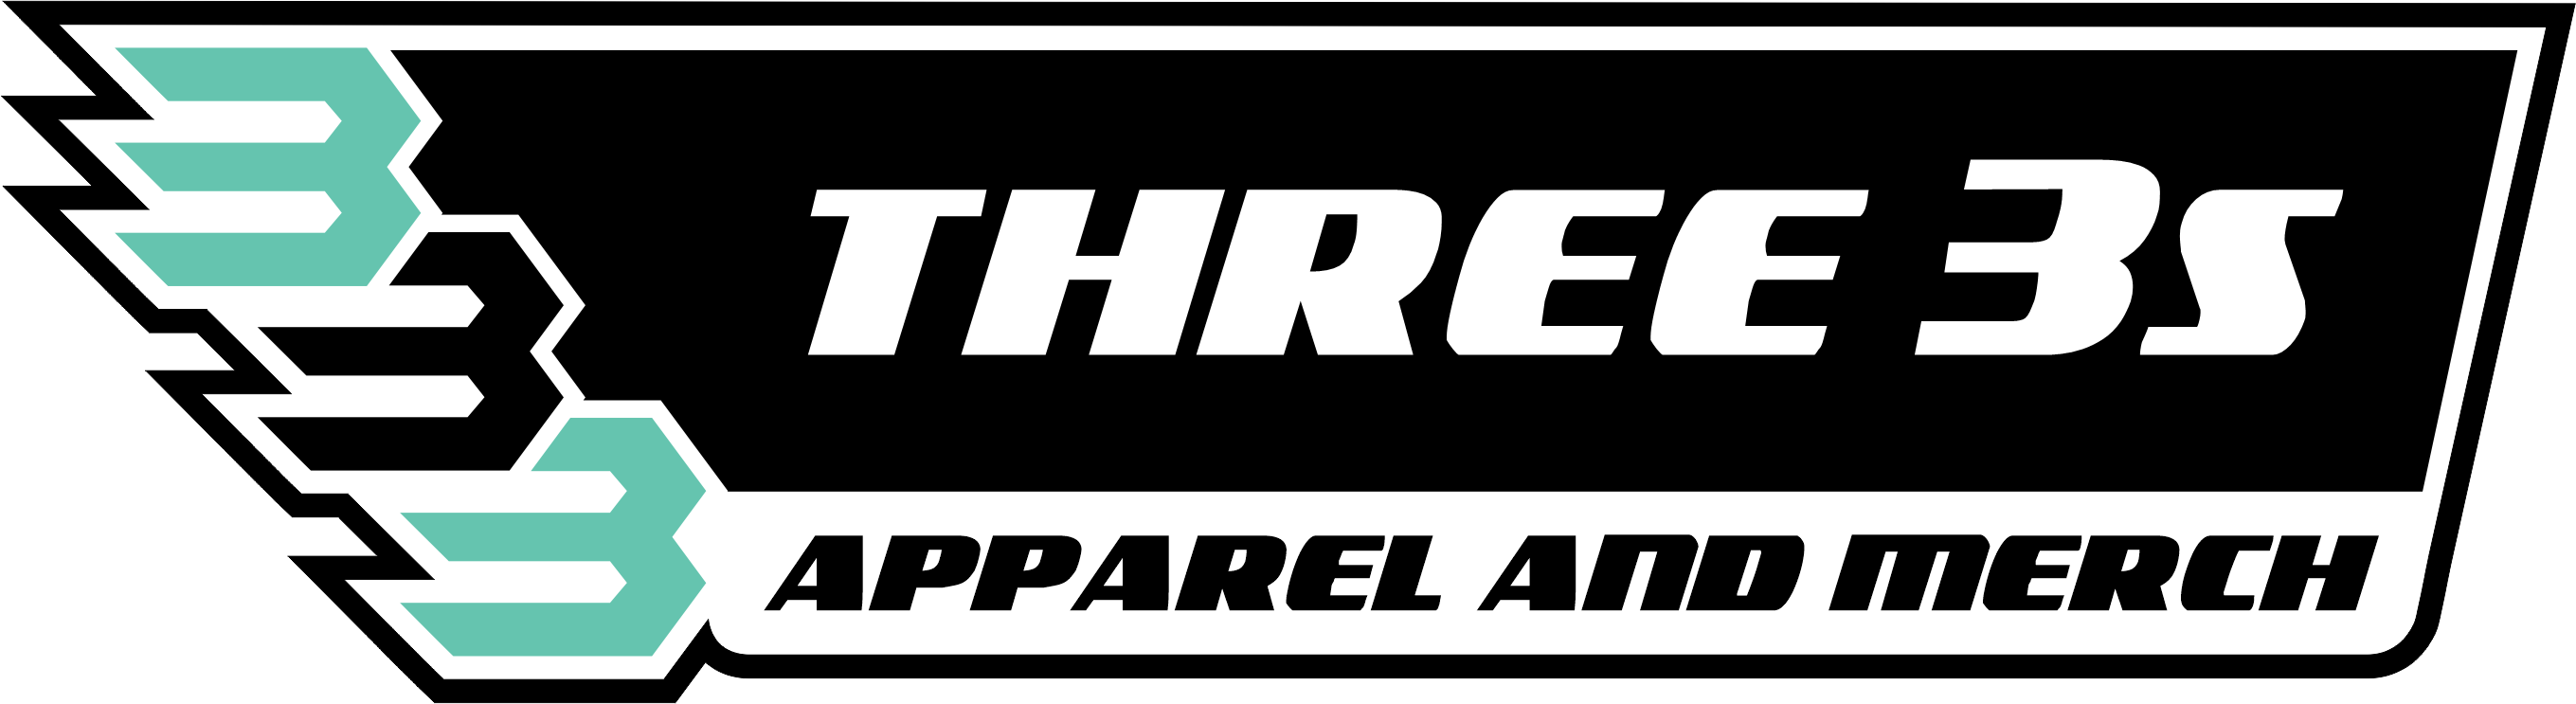 Three 3s Apparel and Merch